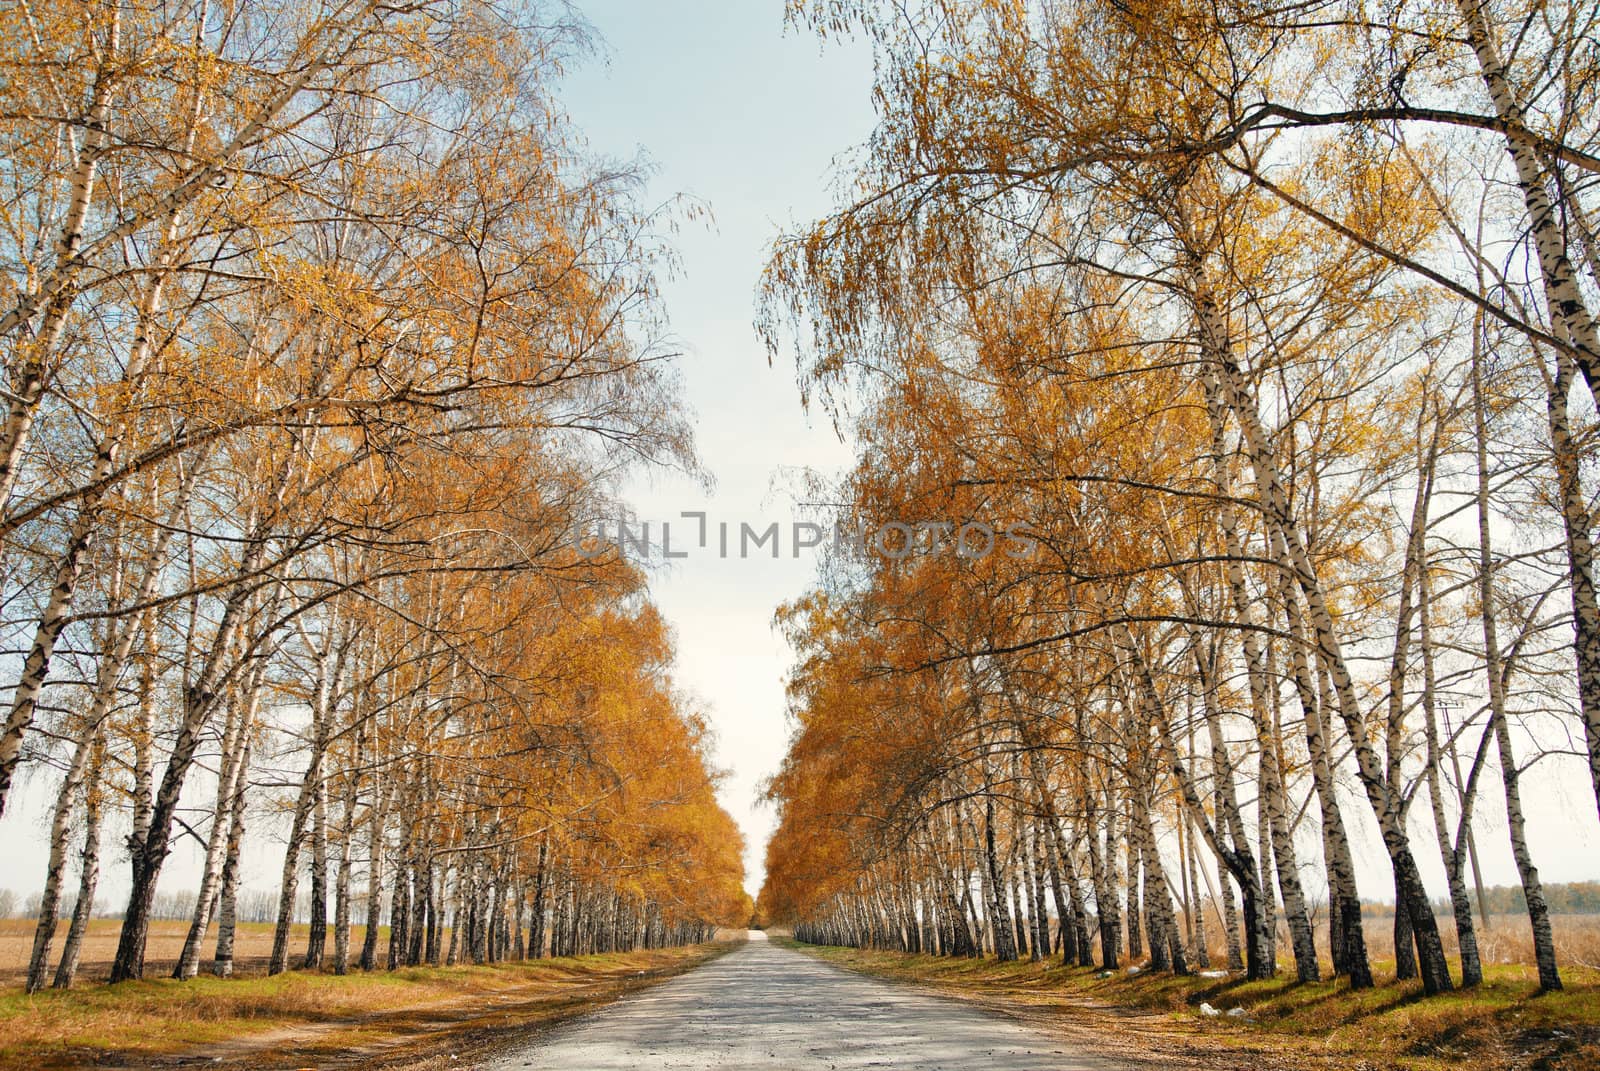 Perspective view onto the road between trees in late autumn. Natural light and colors